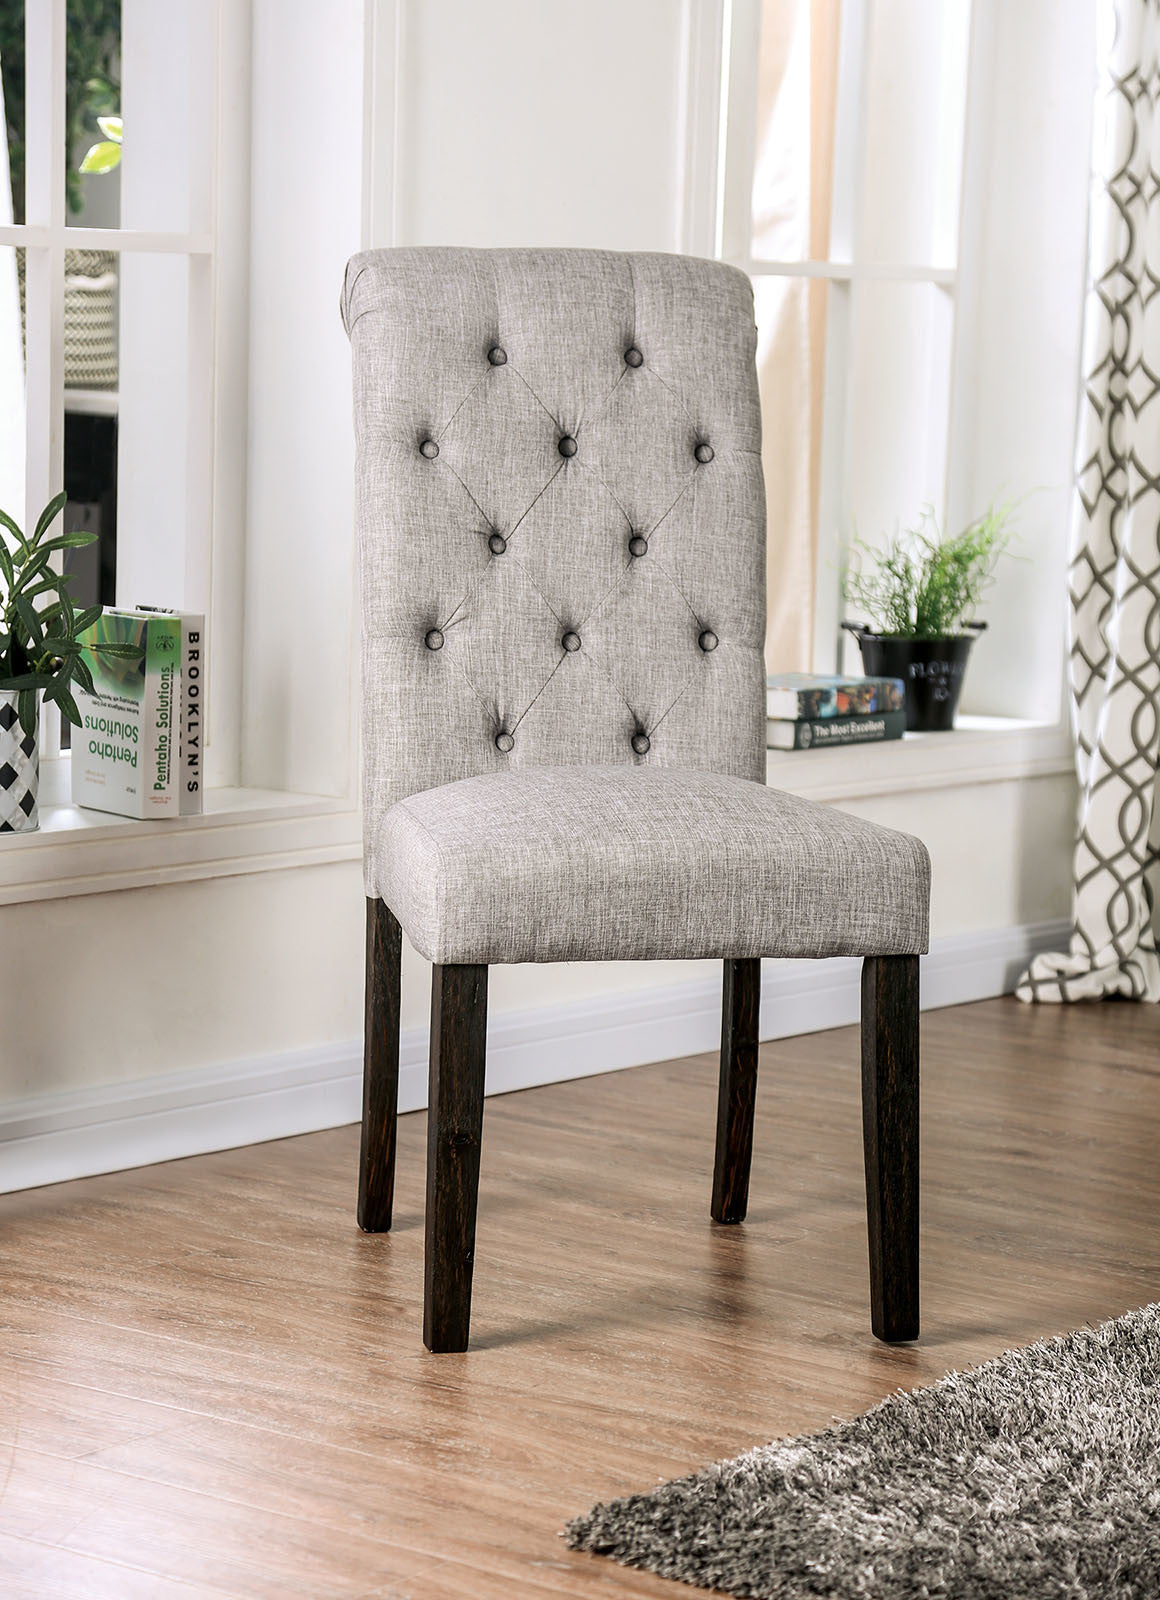 Classic Antique Black / Light Gray Set of 2 Side Chairs Button Tufted Linen Like Fabric Solid wood Chair Upholstered Scroll Back Kitchen Rustic Dining Room Furniture